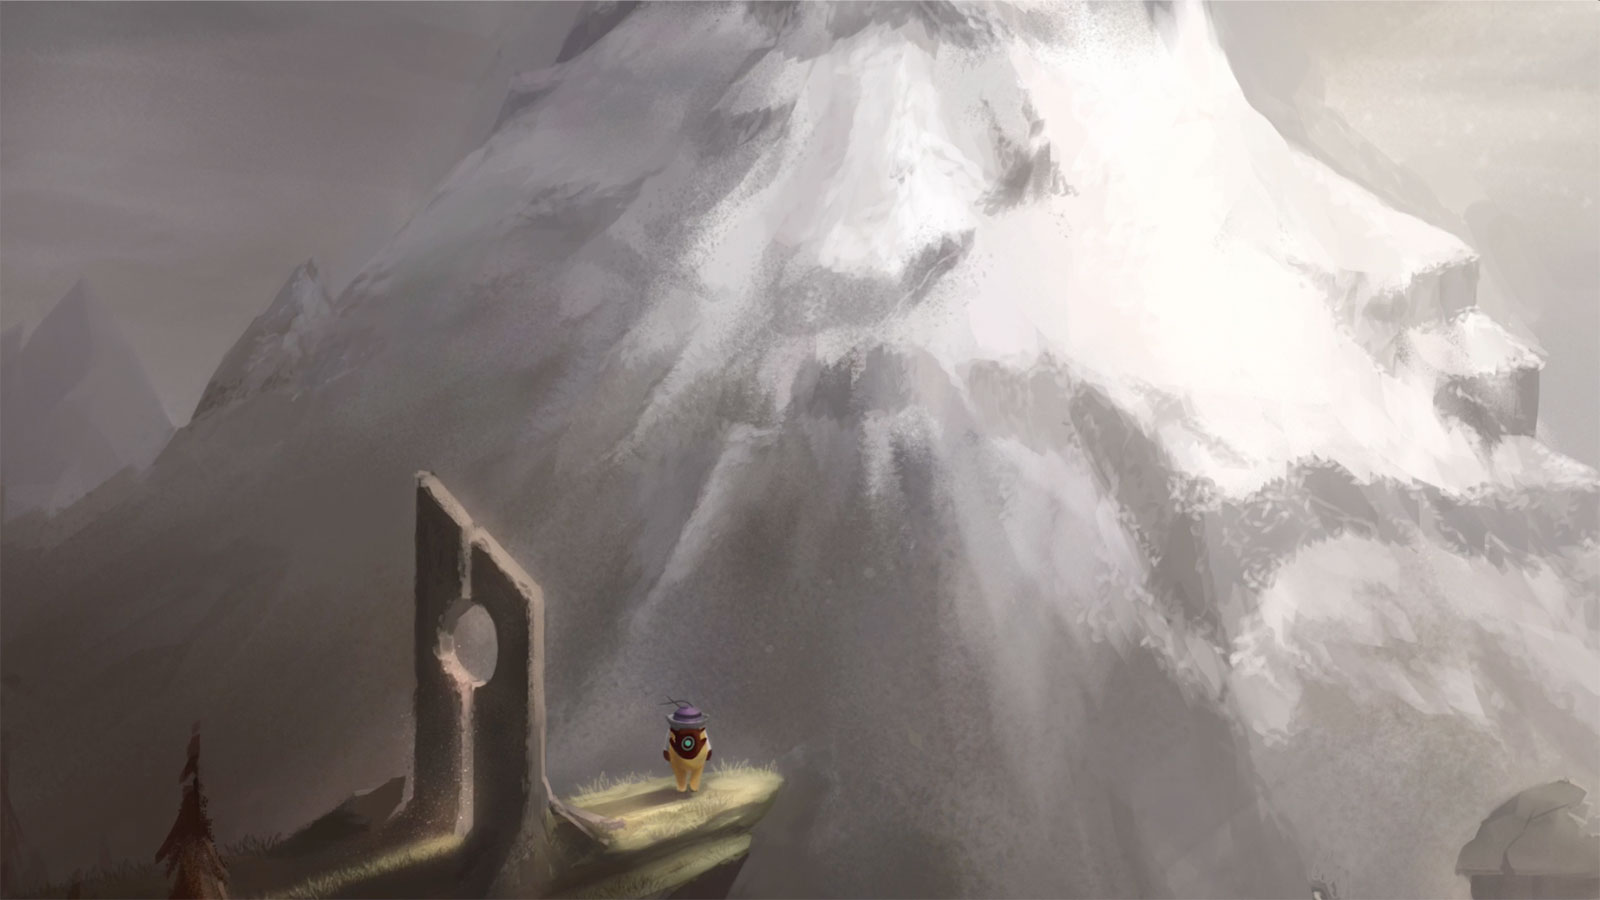 Pilot character stands on a precipice before a large mountain.